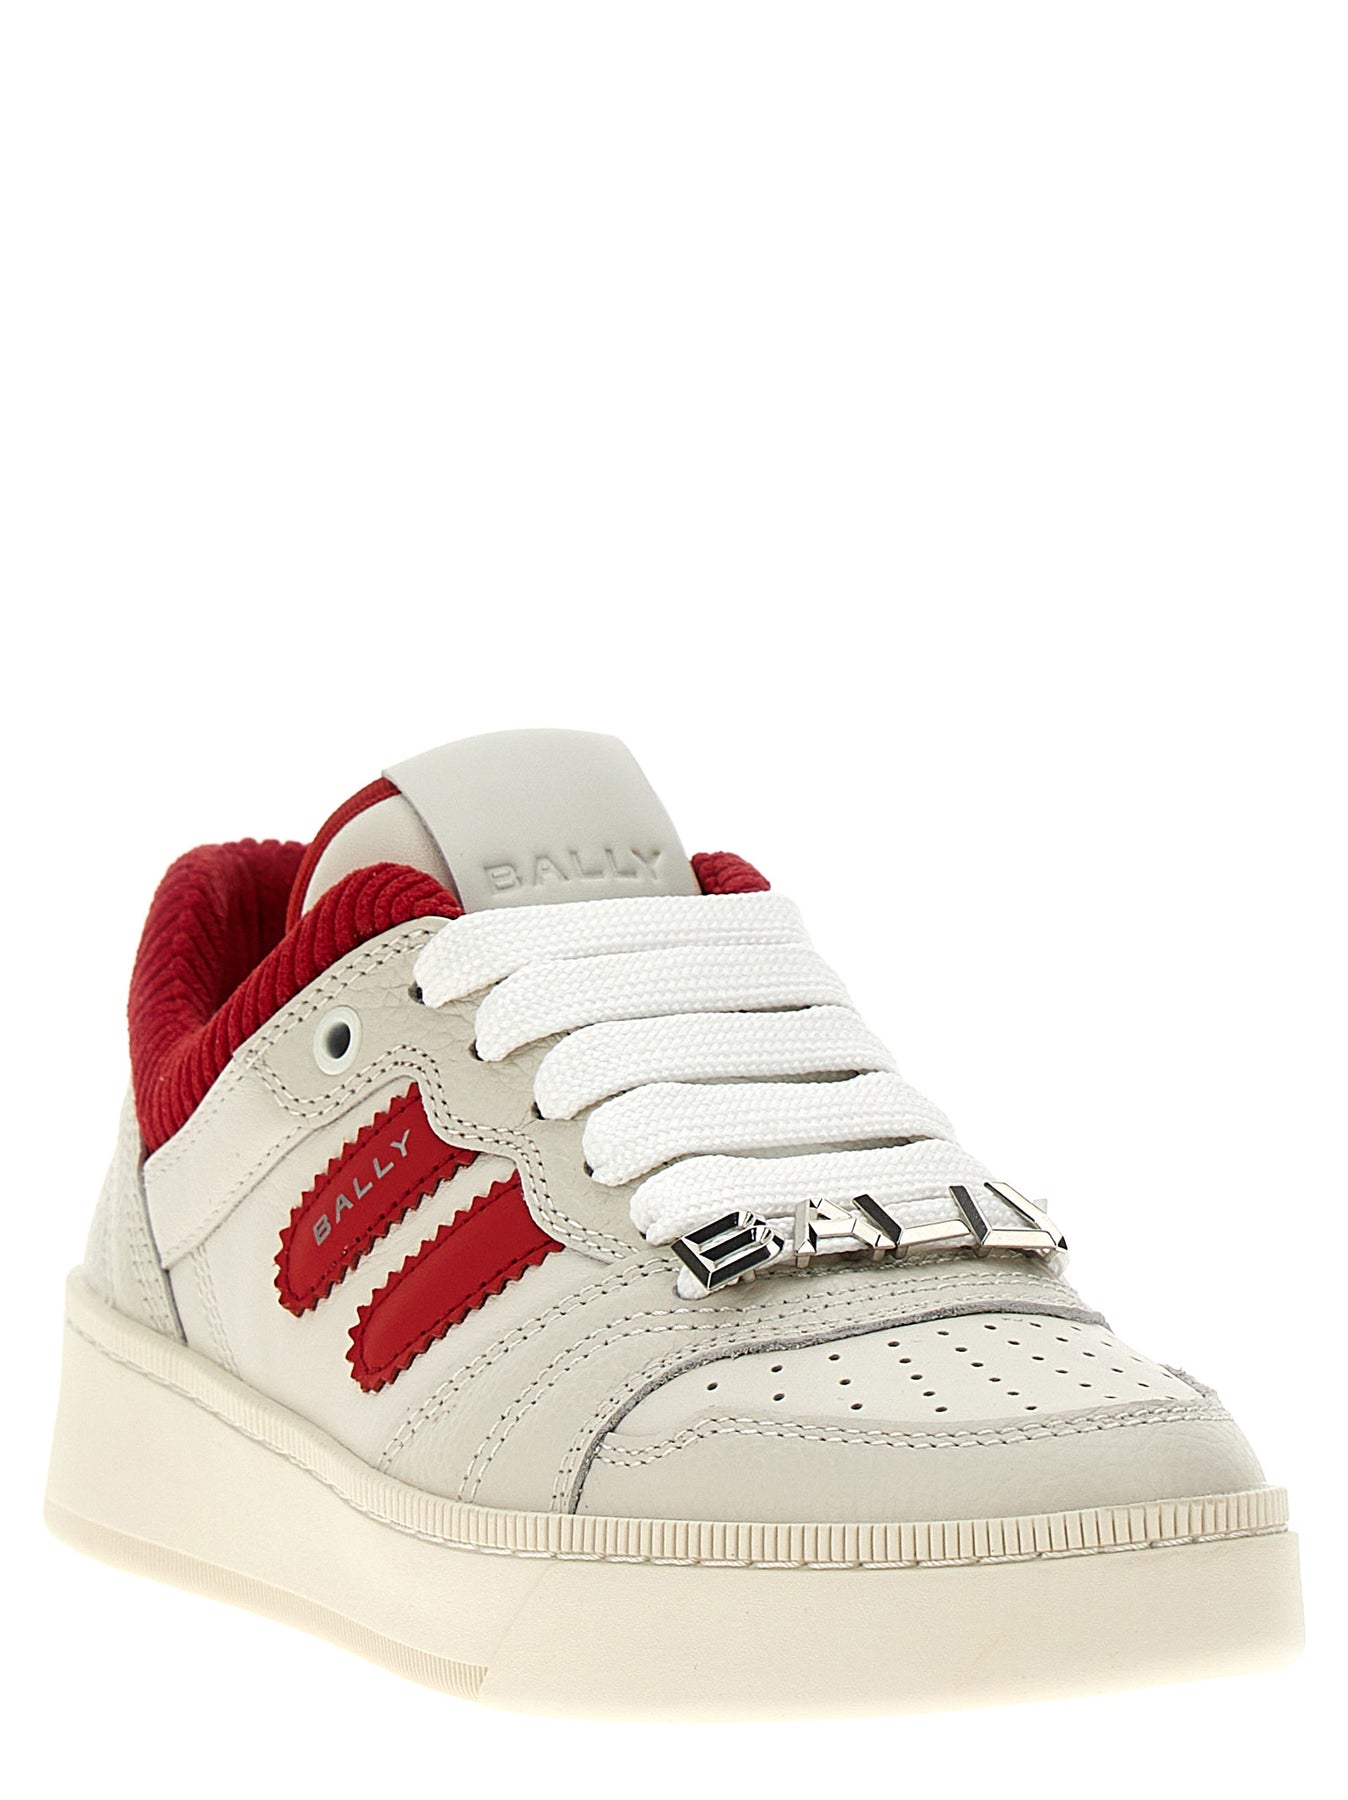 Shop Bally Royalty Sneakers